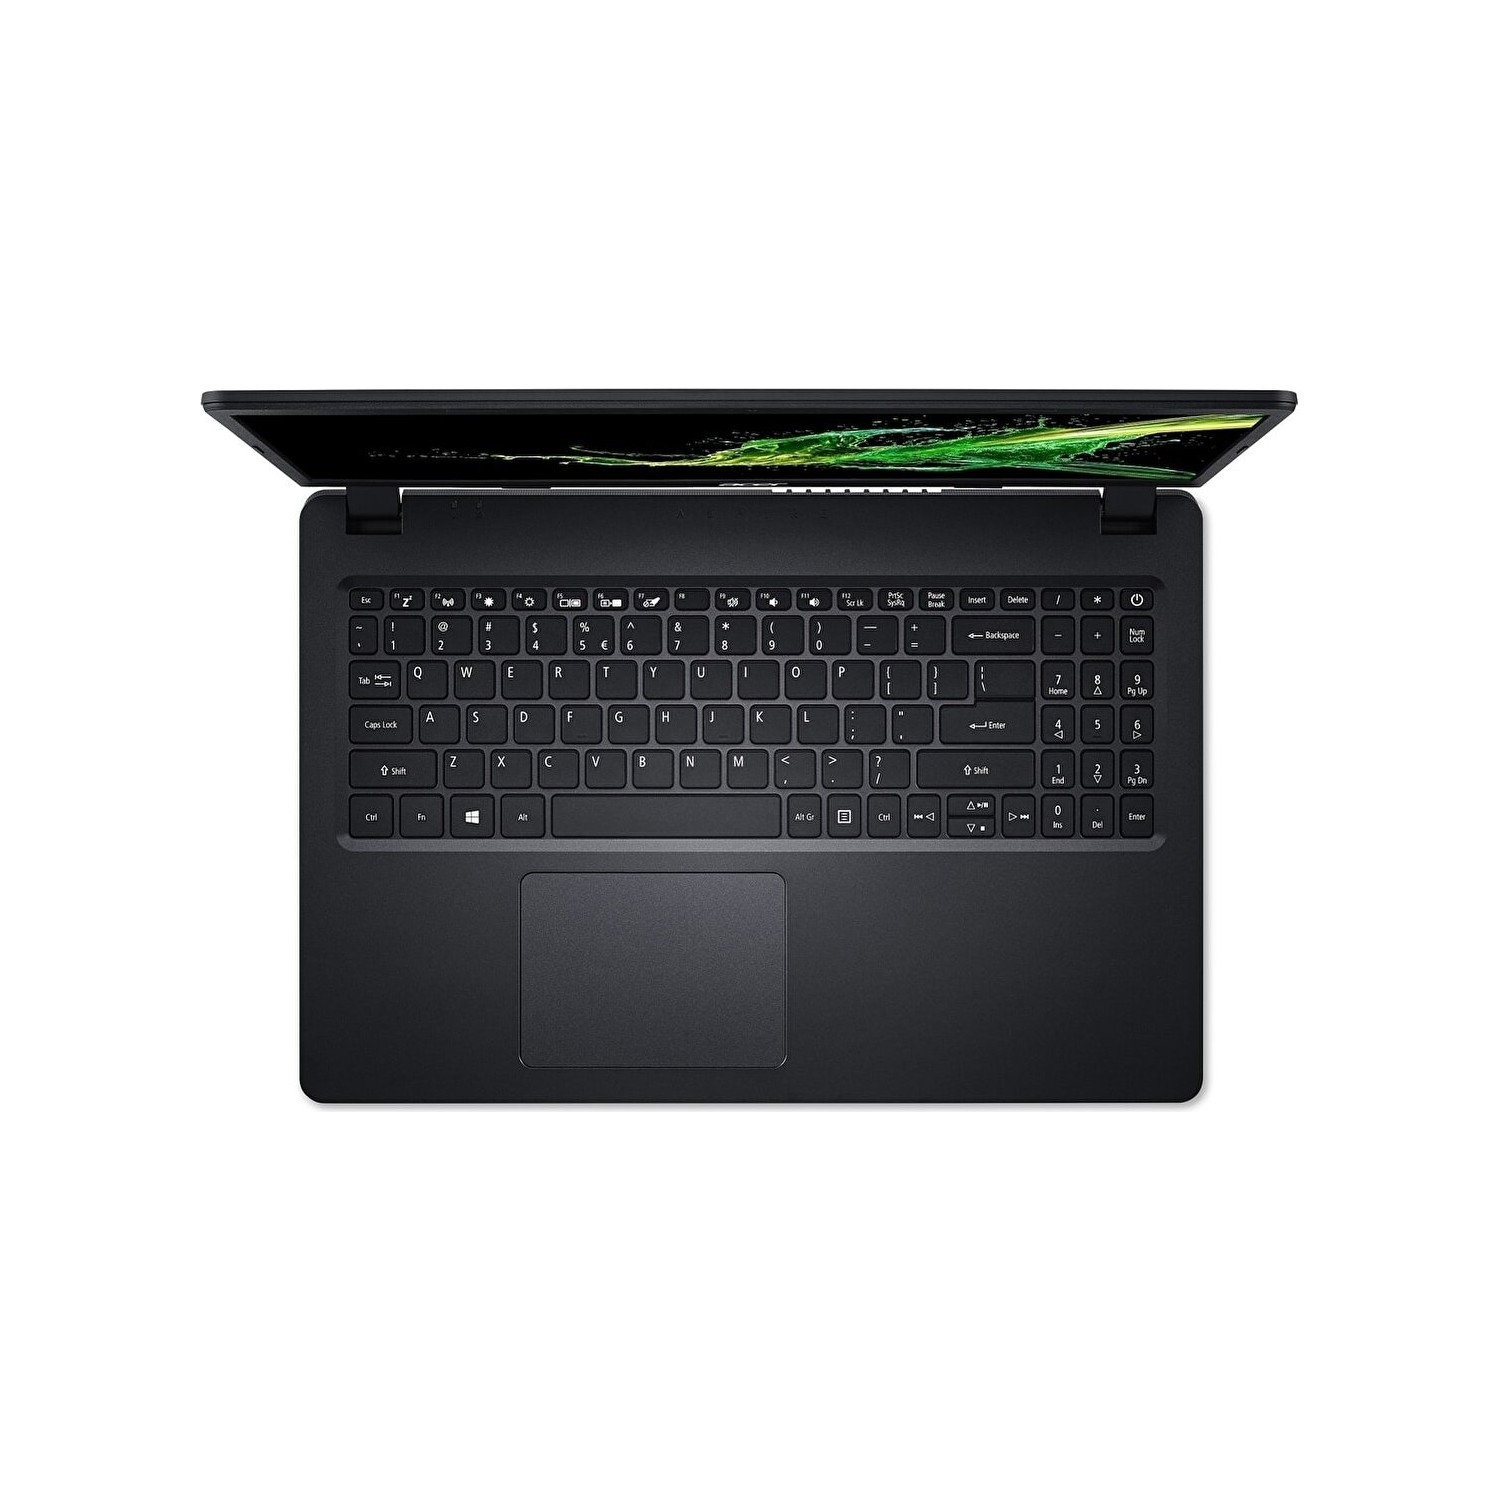 Acer Aspire a315-34. Acer a315 55kg 31e4 клавиатура. Acer Aspire a315-34 Black Intel n4020 (up to 2.8GHZ), 8gb, 1tb + 512gb. Aspire a315-34 характеристики.